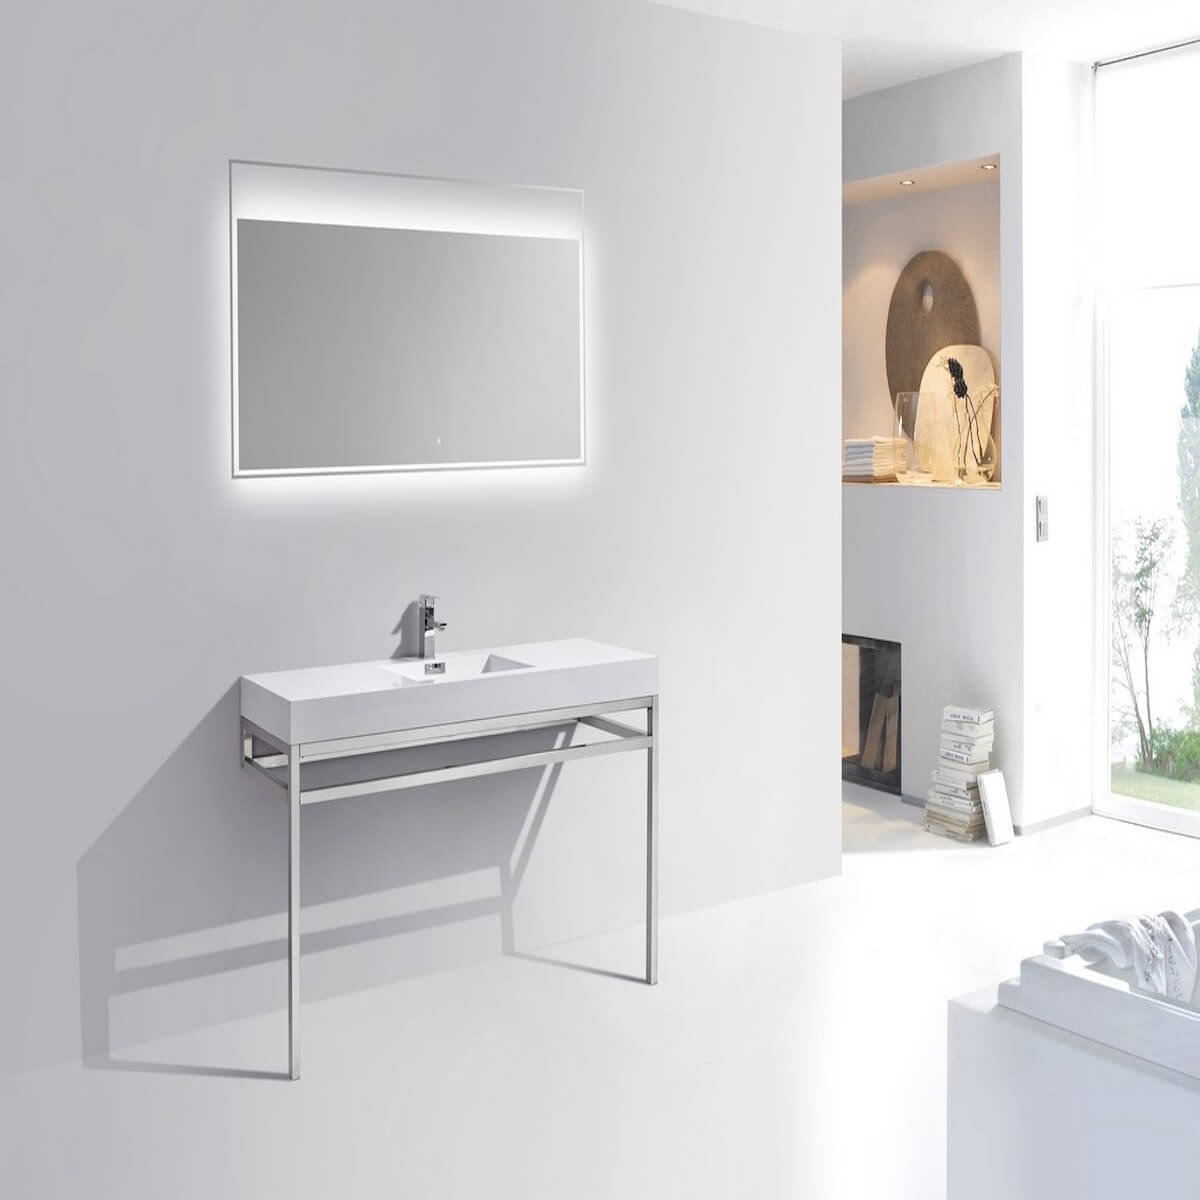 KubeBath Haus 60” Single Sink Stainless Steel Console with While Acrylic Sink CH60S in Bathroom